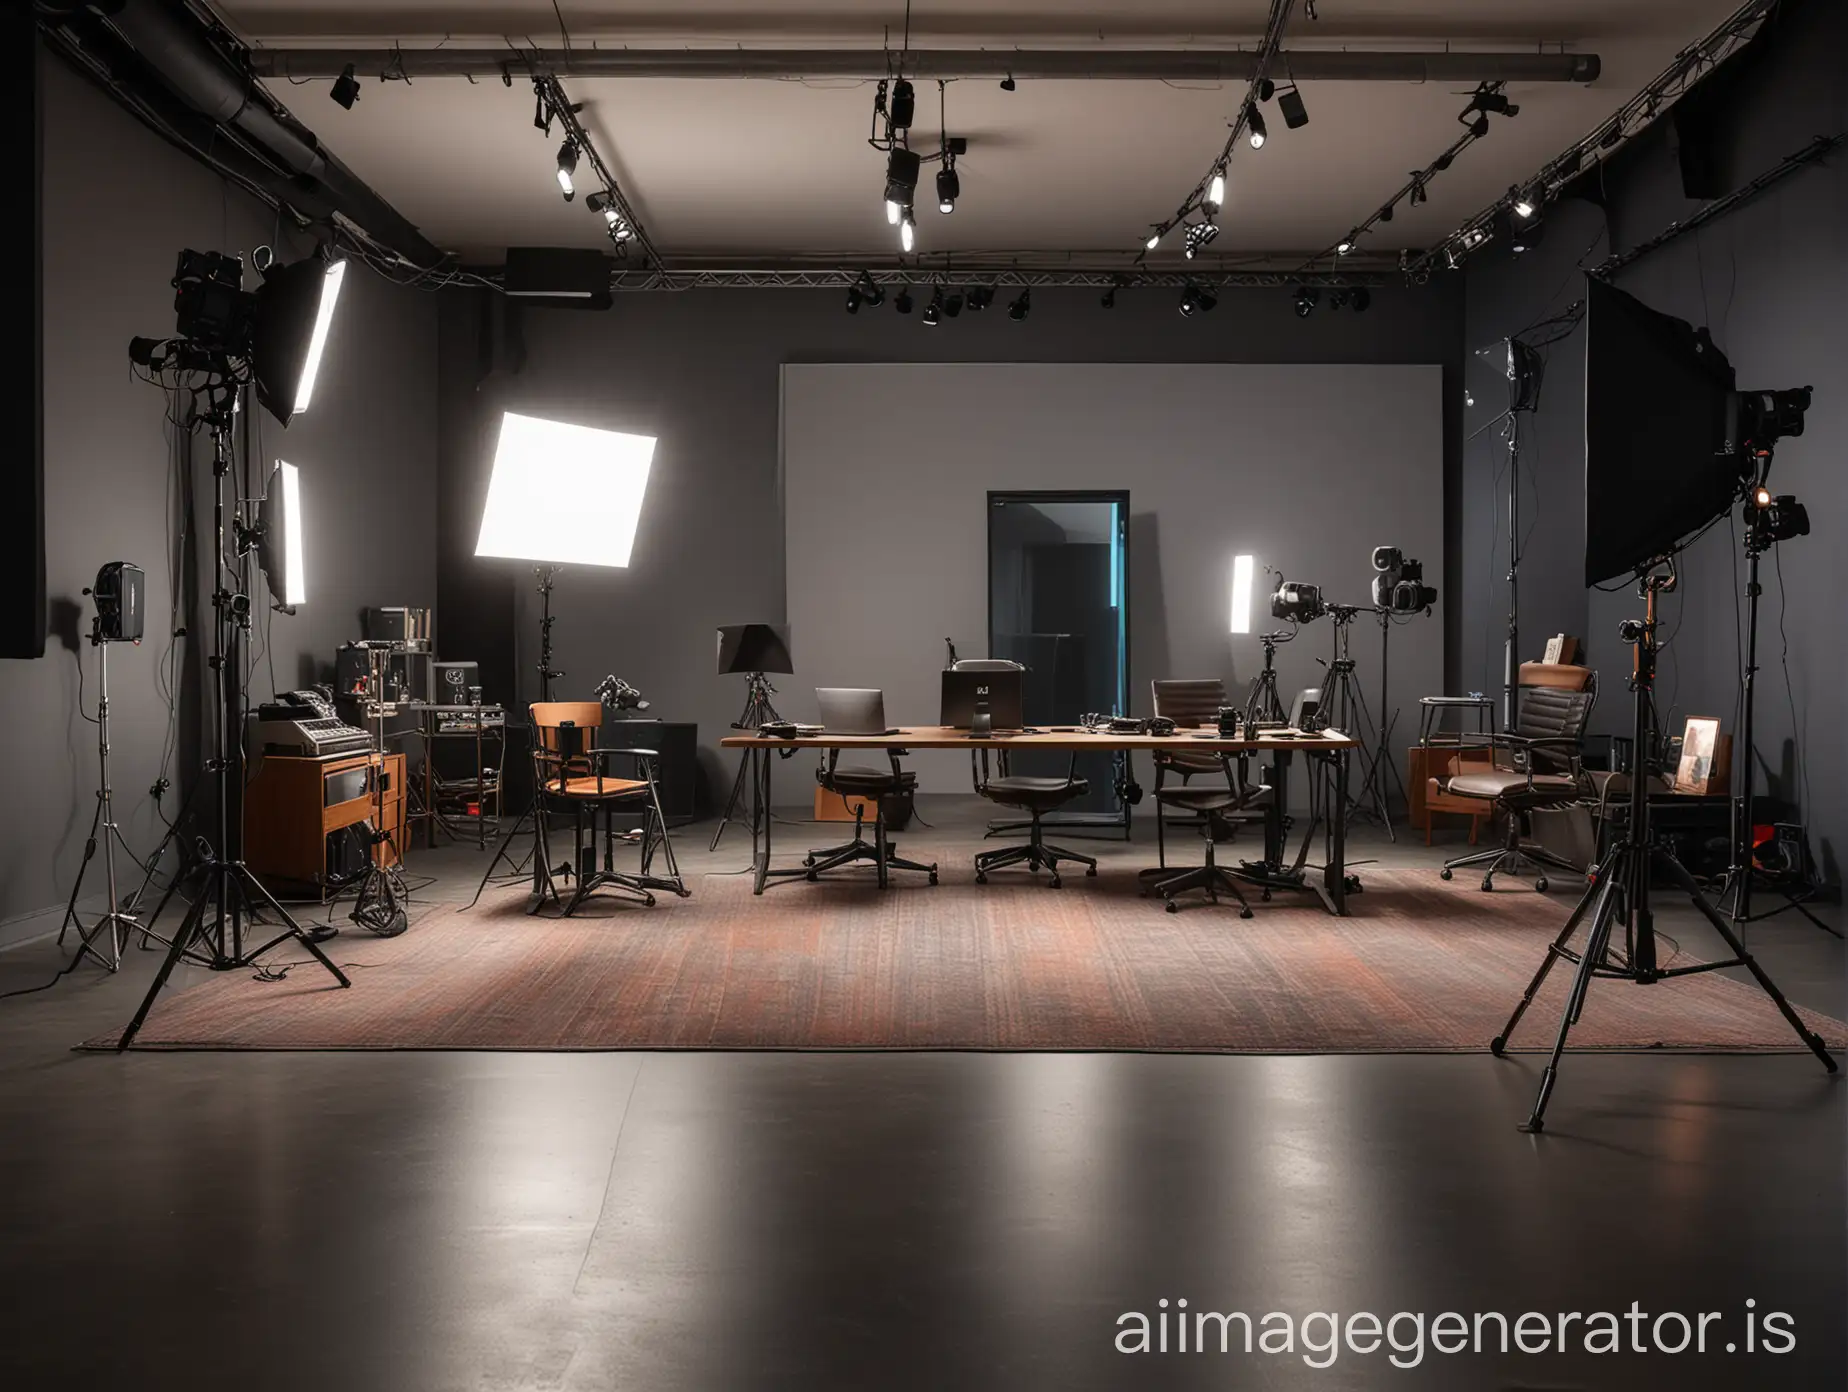 A wide-angle shot of an empty professional studio prepared with professional cameras and studio equipment for a webinar in a modern office setting, with sleek furniture, high-tech equipment, and a backdrop with branding, the scene exuding a sense of anticipation and readiness, illuminated by soft studio lighting, shot with a Sony A7R IV, 28mm lens, vibrant colors